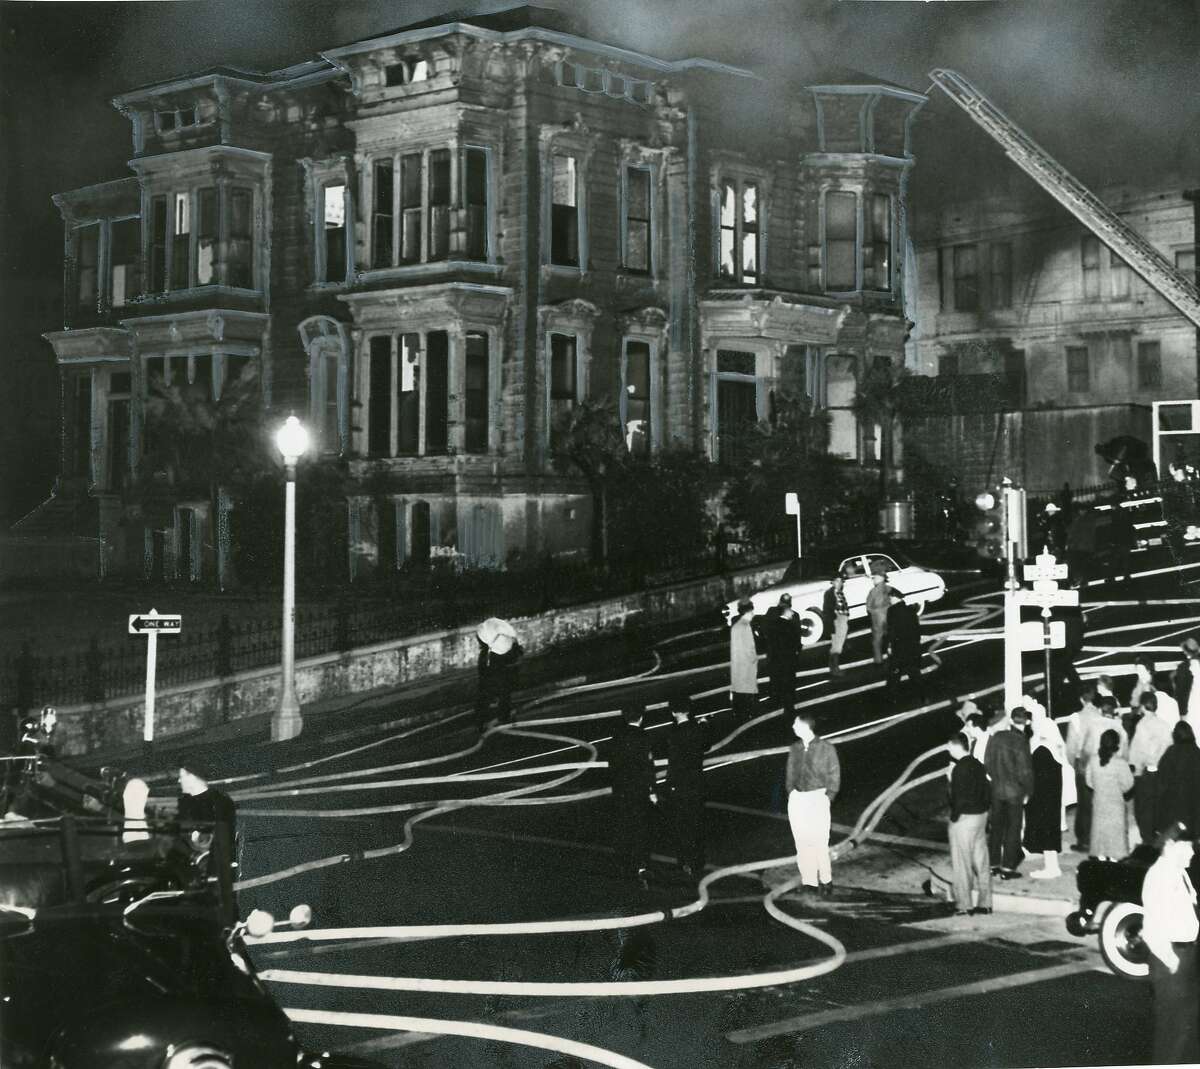 A fire, perhaps set by transients or youngsters, tore through the Fortman Mansion at 1007 Gough Street. It had been featured in the movie Vertigo, July 23, 1959